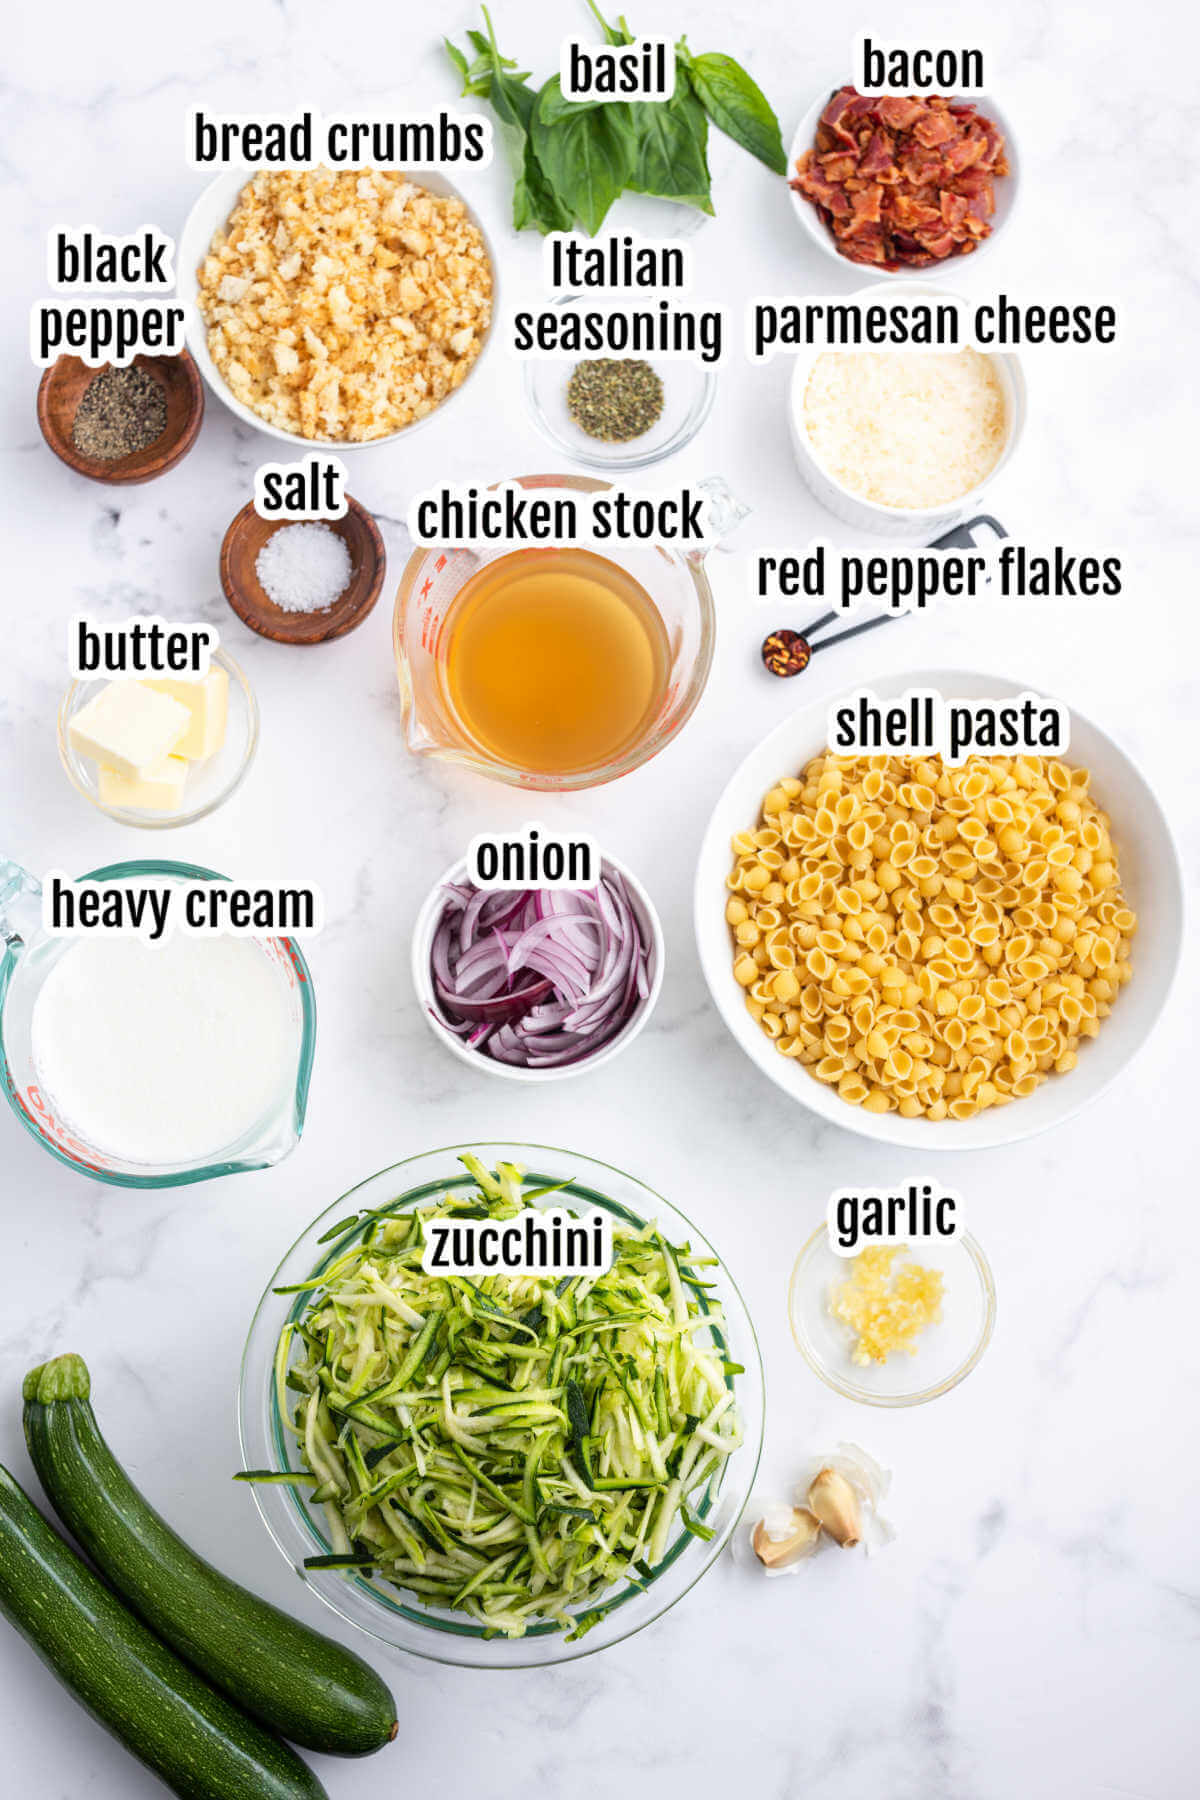 Image of the ingredients needed to make creamy zucchini sauce for pasta. 